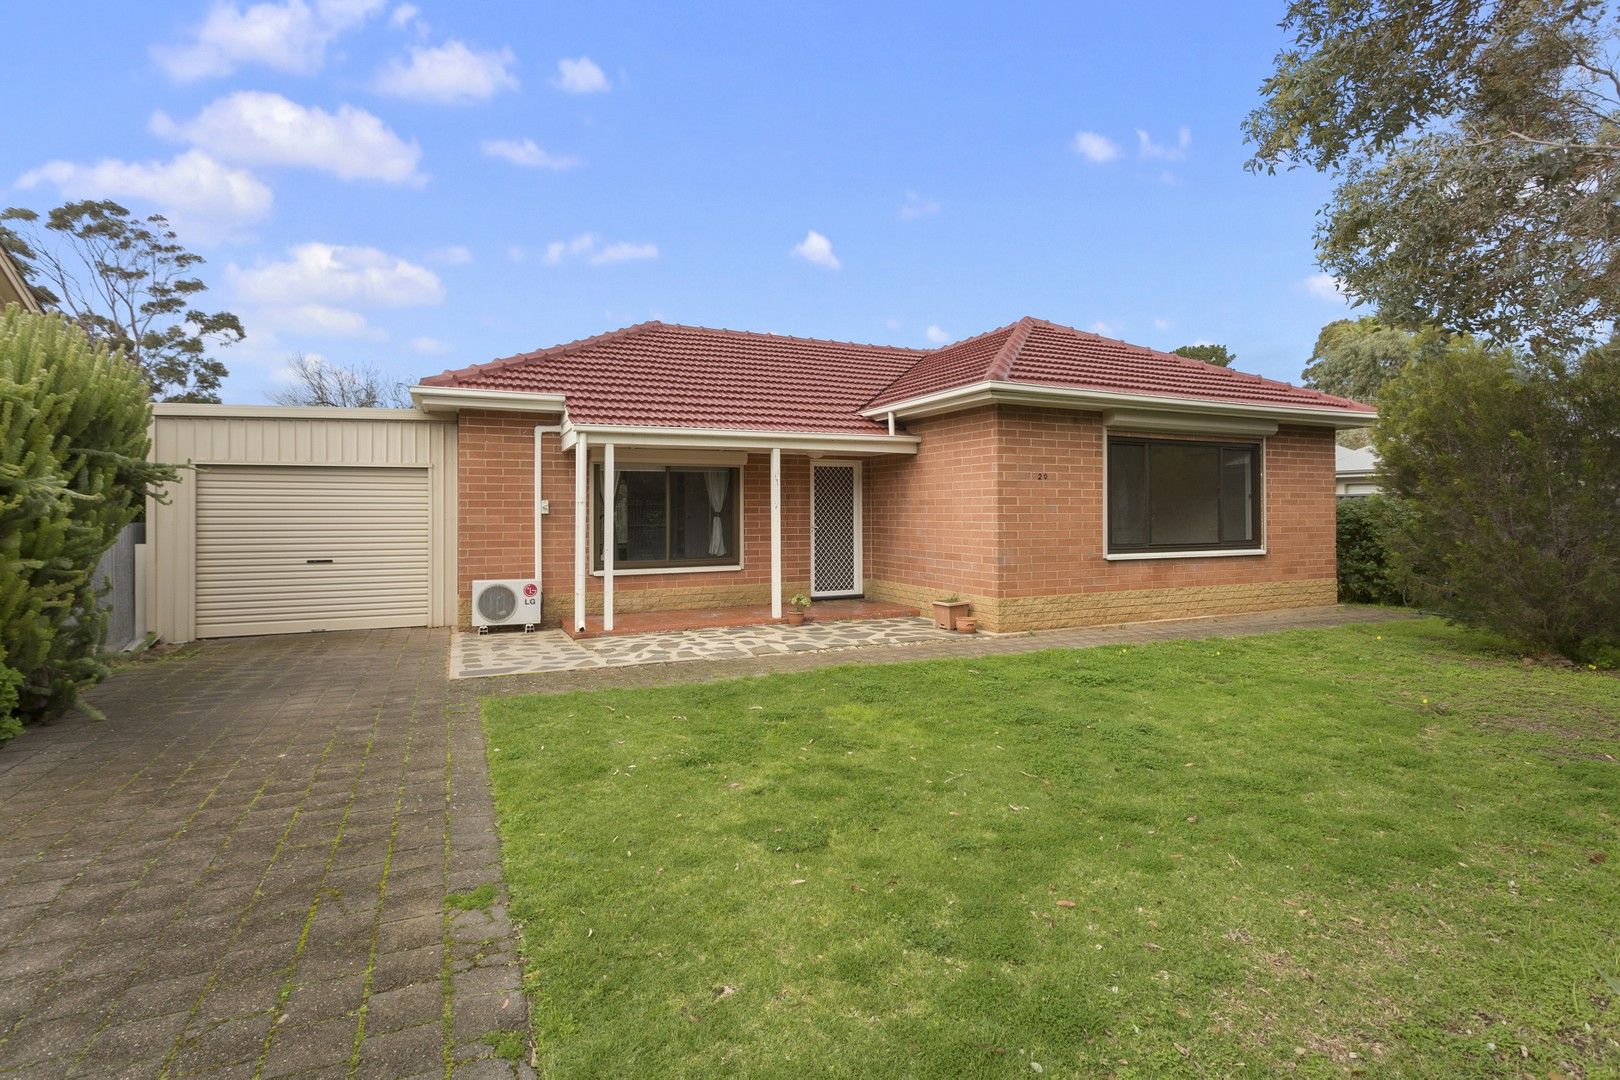 3 bedrooms House in 20 Crozier Terrace OAKLANDS PARK SA, 5046